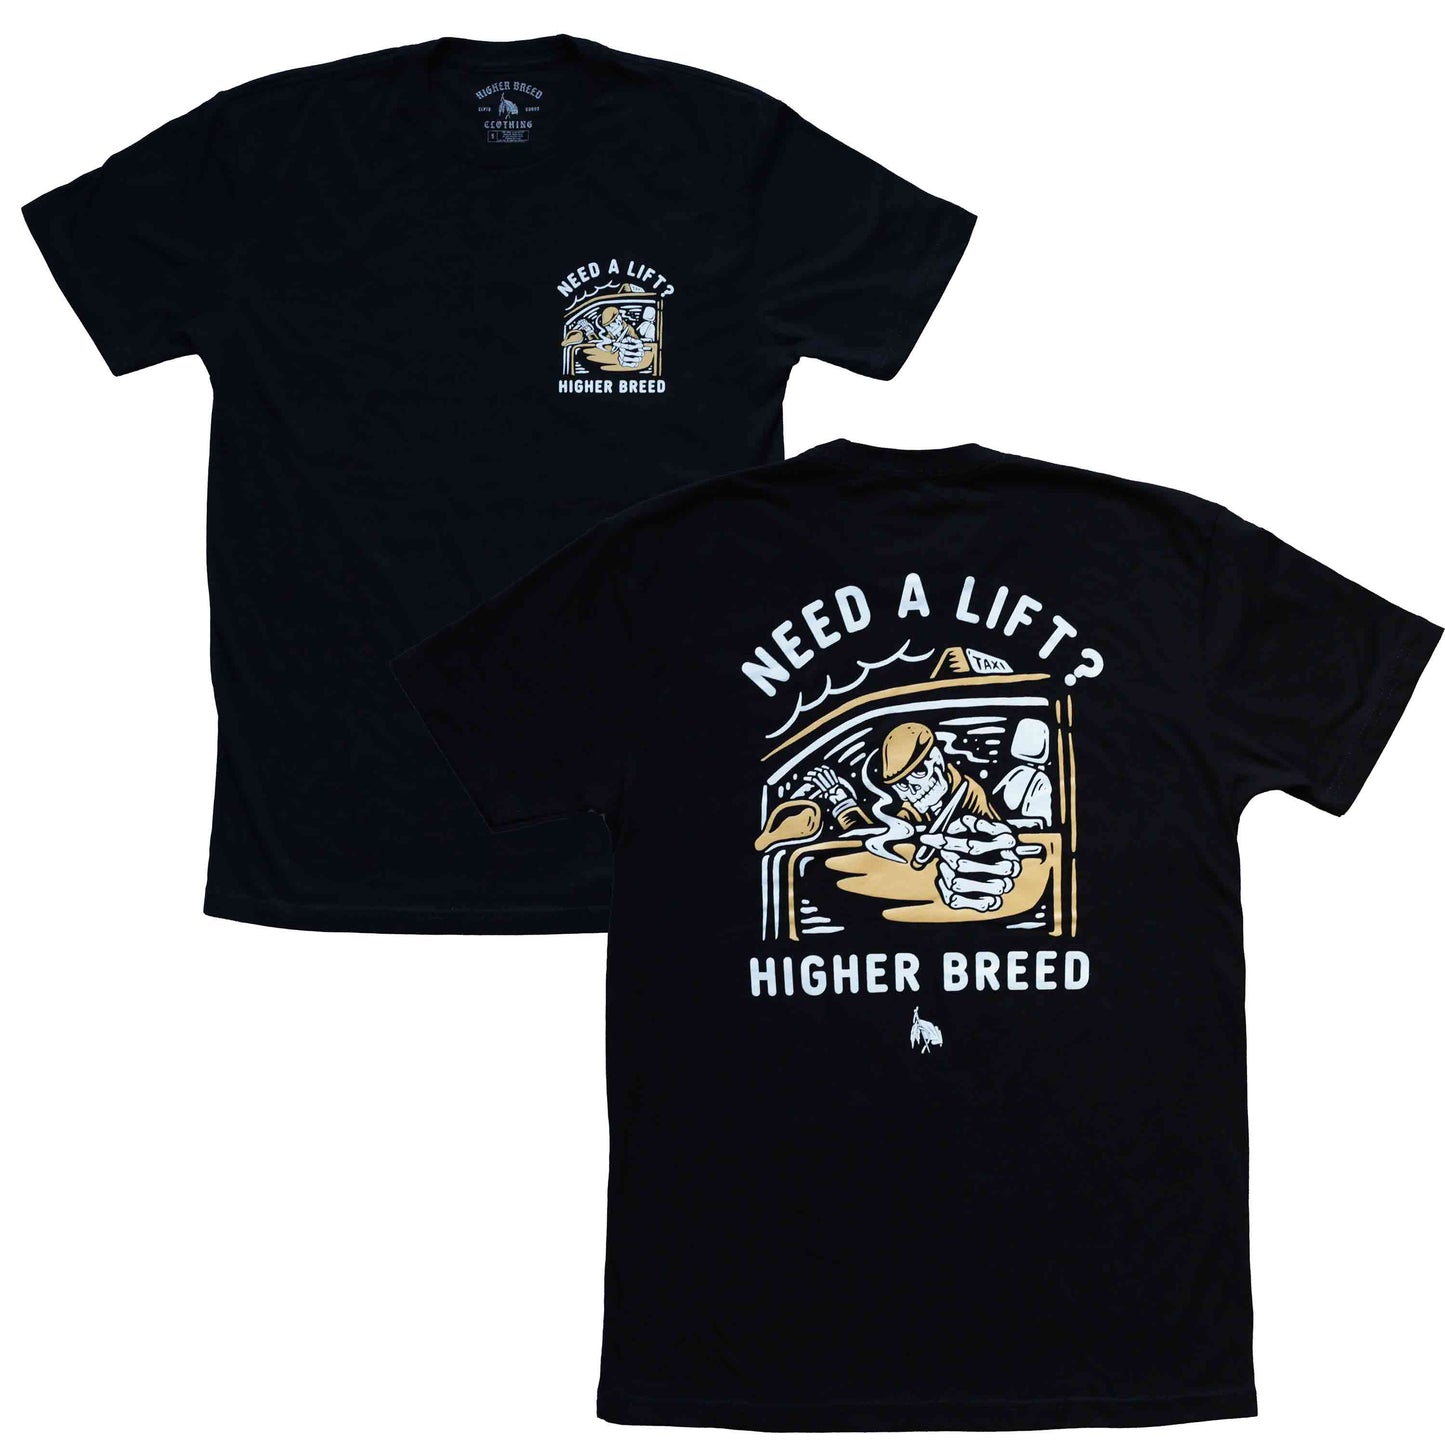 Higher Breed - Need a Lift? - T-Shirt